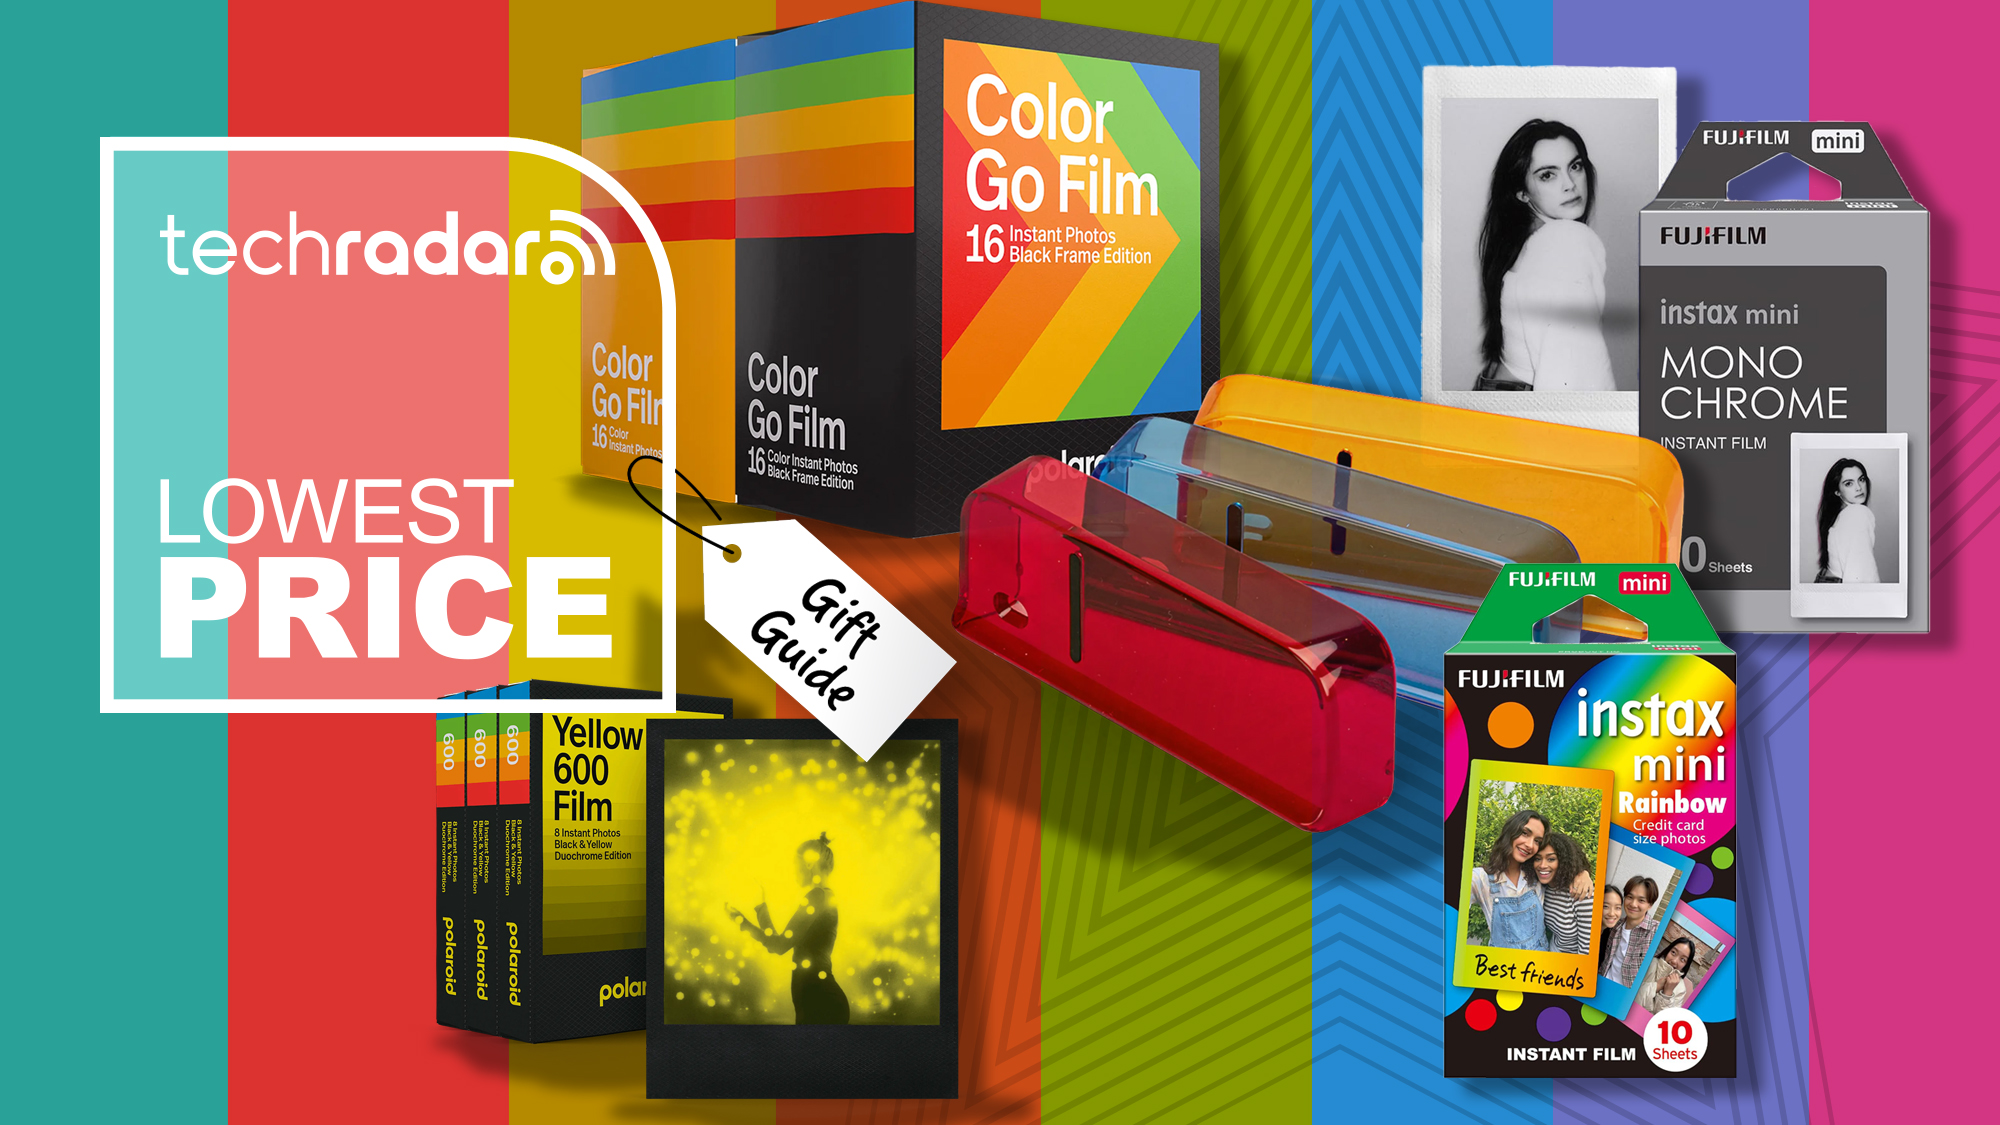 POLAROID'S PACK FILM  The Best Instant Film Ever Made? 